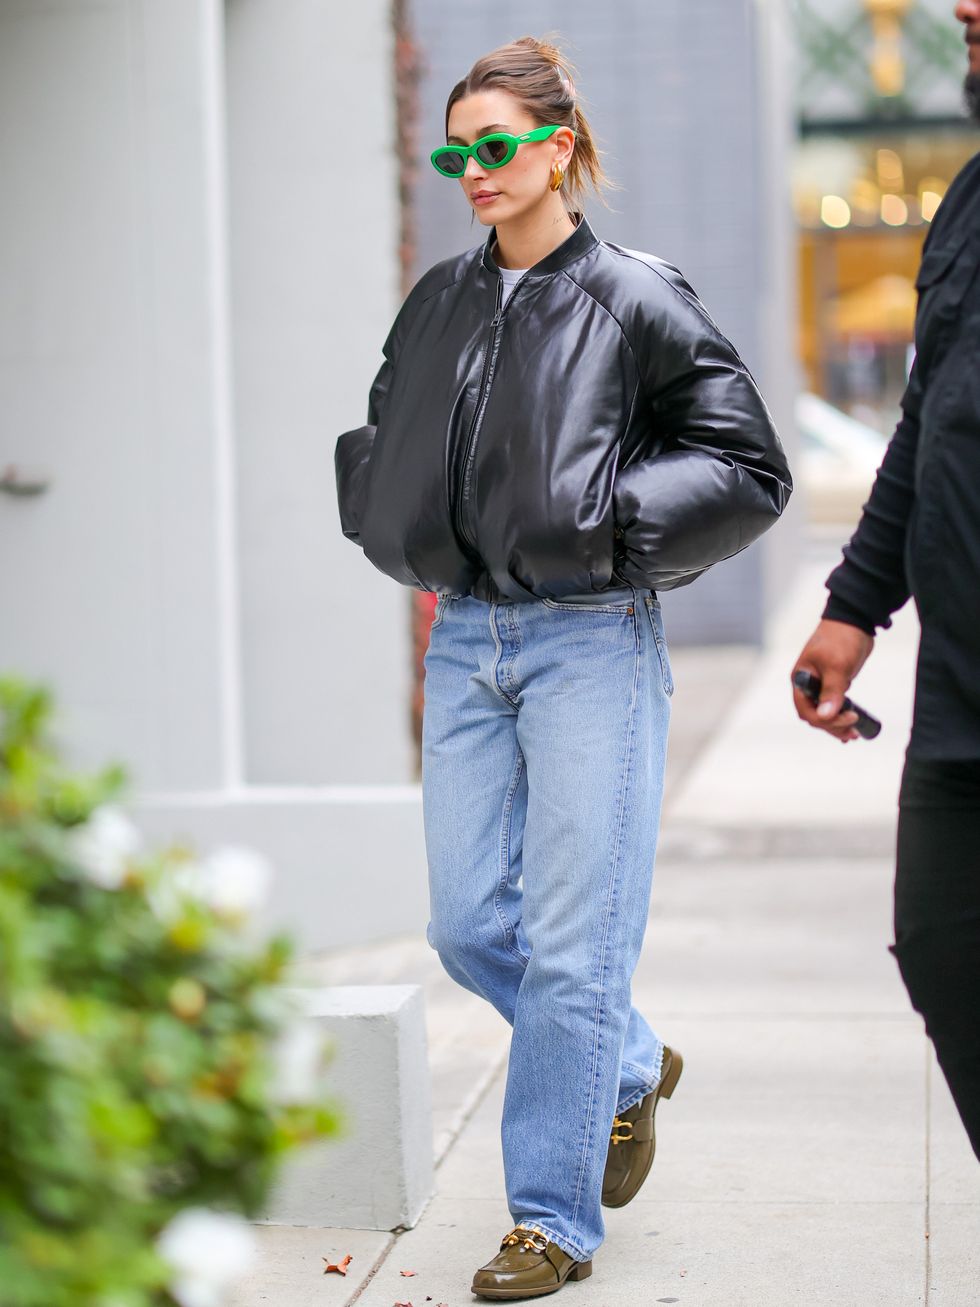 los angeles, ca december 15 hailey bieber is seen on december 15, 2022 in los angeles, california photo by rachpootbauer griffingc images